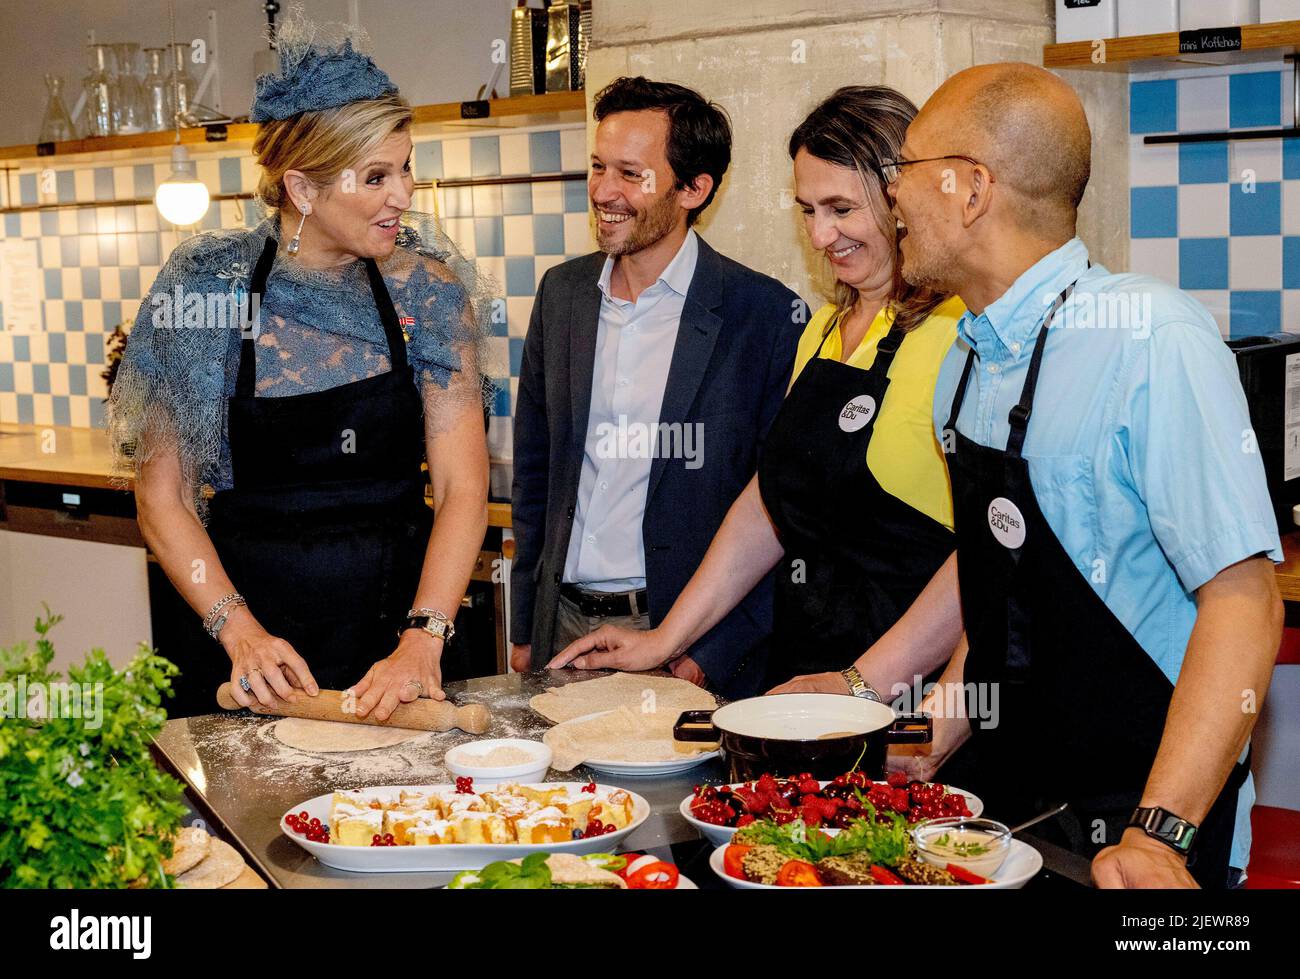 Helmut-Zilk-Park in Vienna, June 28, 2022, Queen Maxima of The Netherlands at the Kulturhaus Brotfabrik in Vienna, on June 28, 2022, for a Workshop food preparation, accompanied by Dr Alexander Van der Bellen, Federal President of the Republic of Austria and Mrs. Doris Schmidauer, his wife, at the 2nd of a 3 days State-visit to Austria Photo: Albert Nieboer/Netherlands OUT/Point de Vue OUT Stock Photo